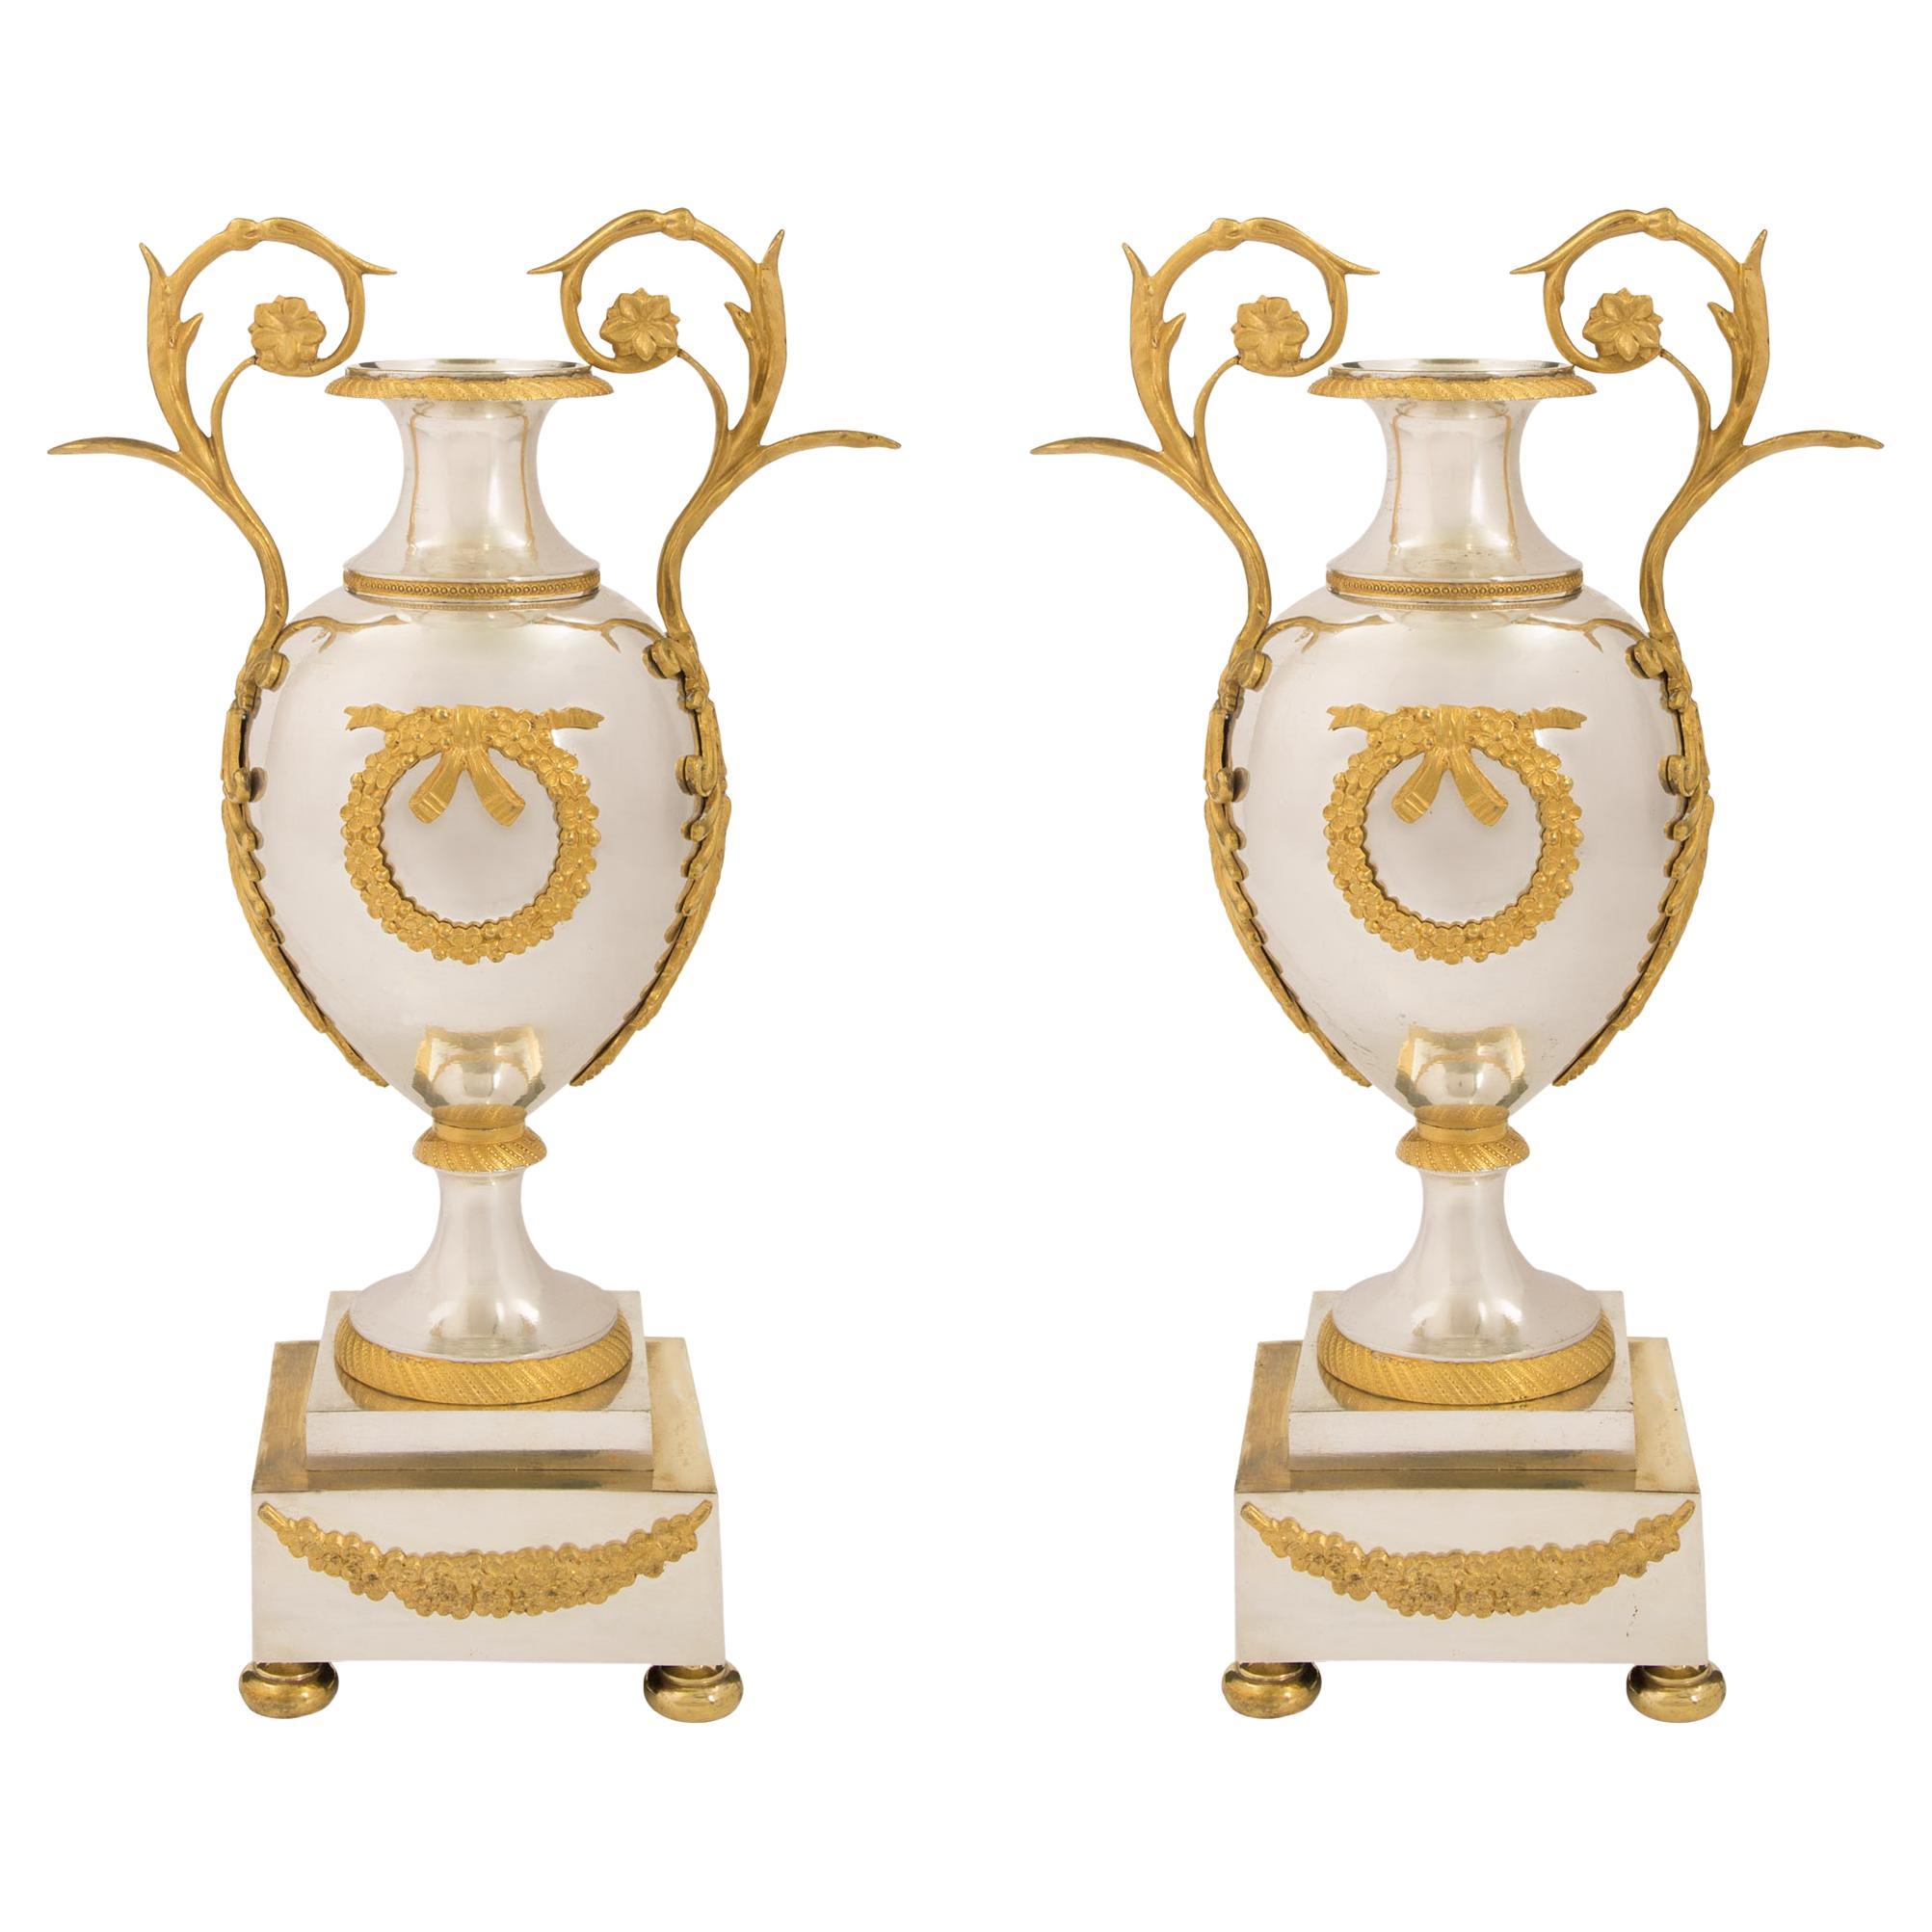 Pair of French Early 19th Century Neoclassical Style Ormolu and Bronze Urns For Sale